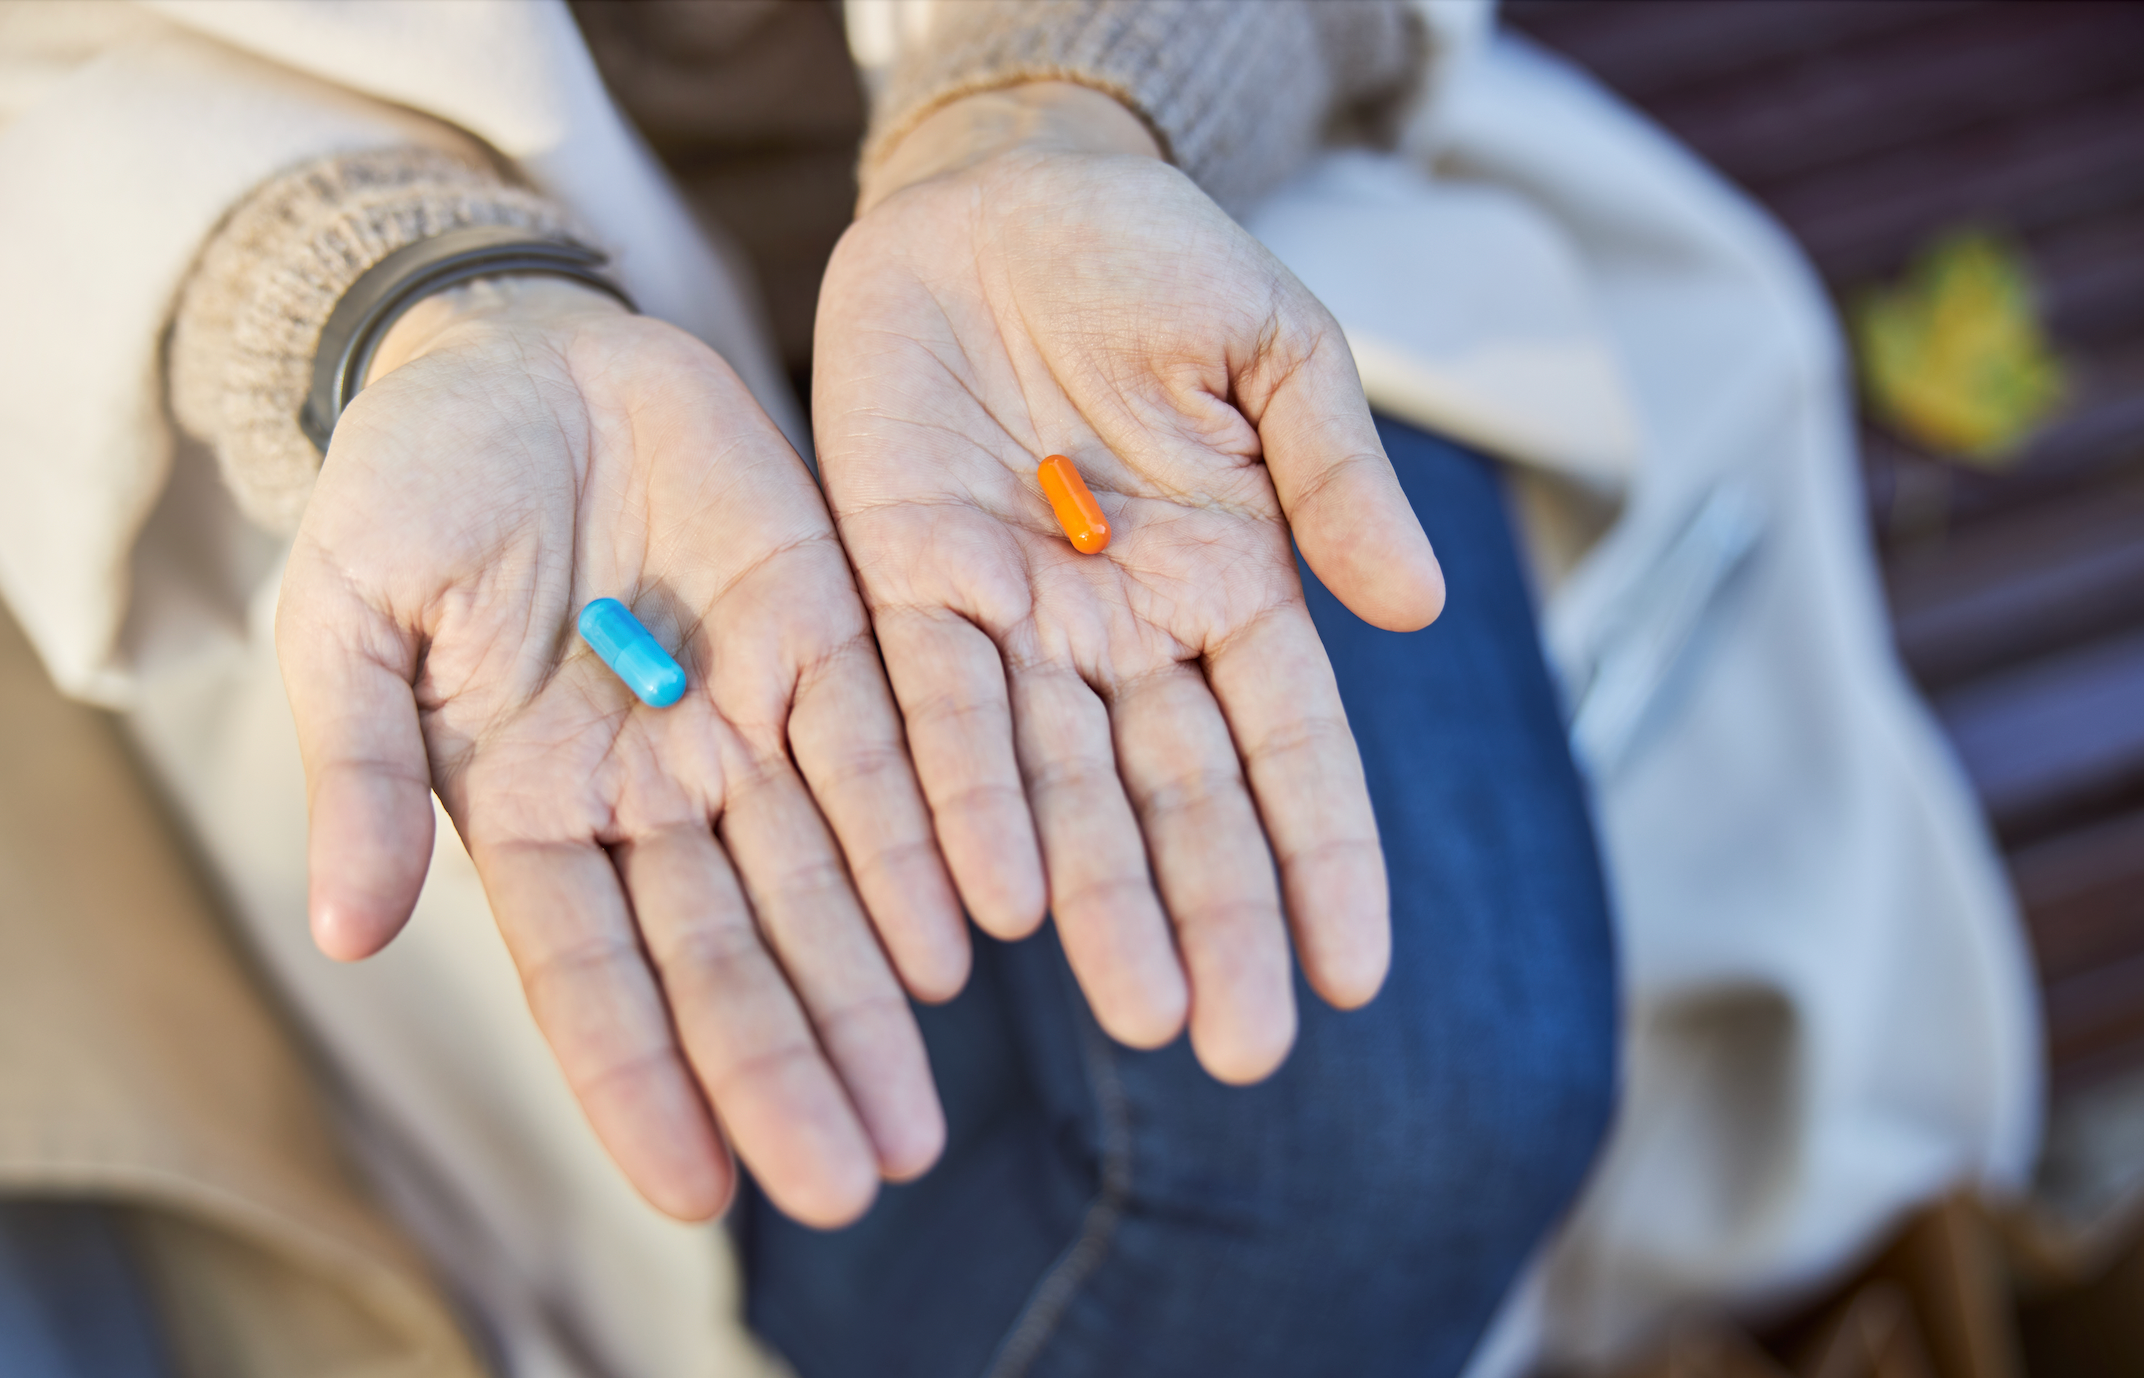 How do you predict which medication can work best for you?